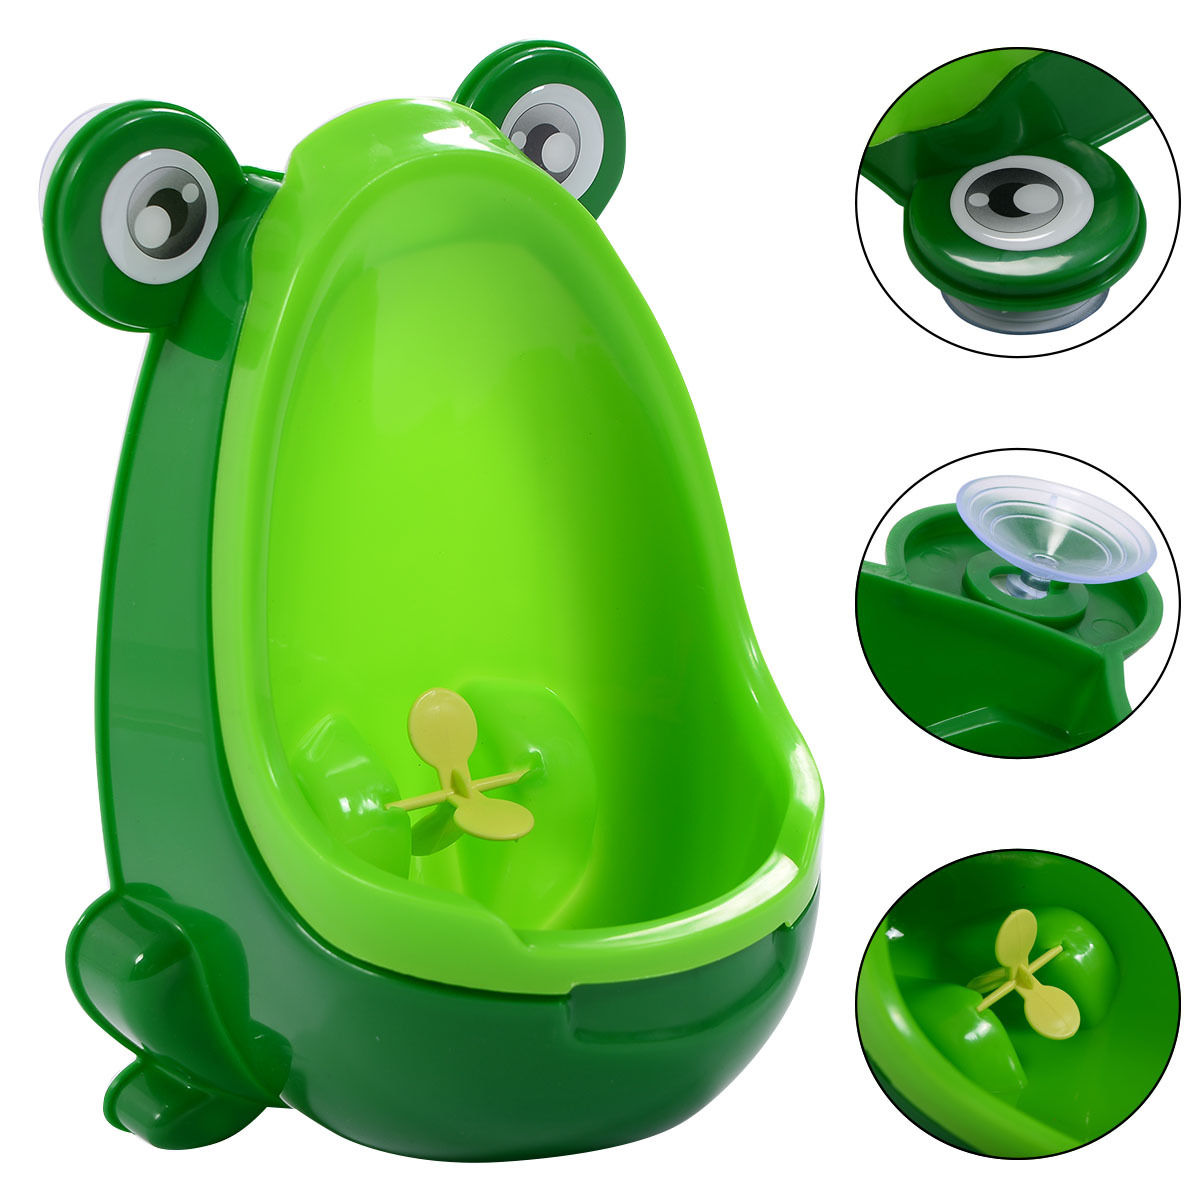 Wall-Mounted Frog Potty Training Urinal